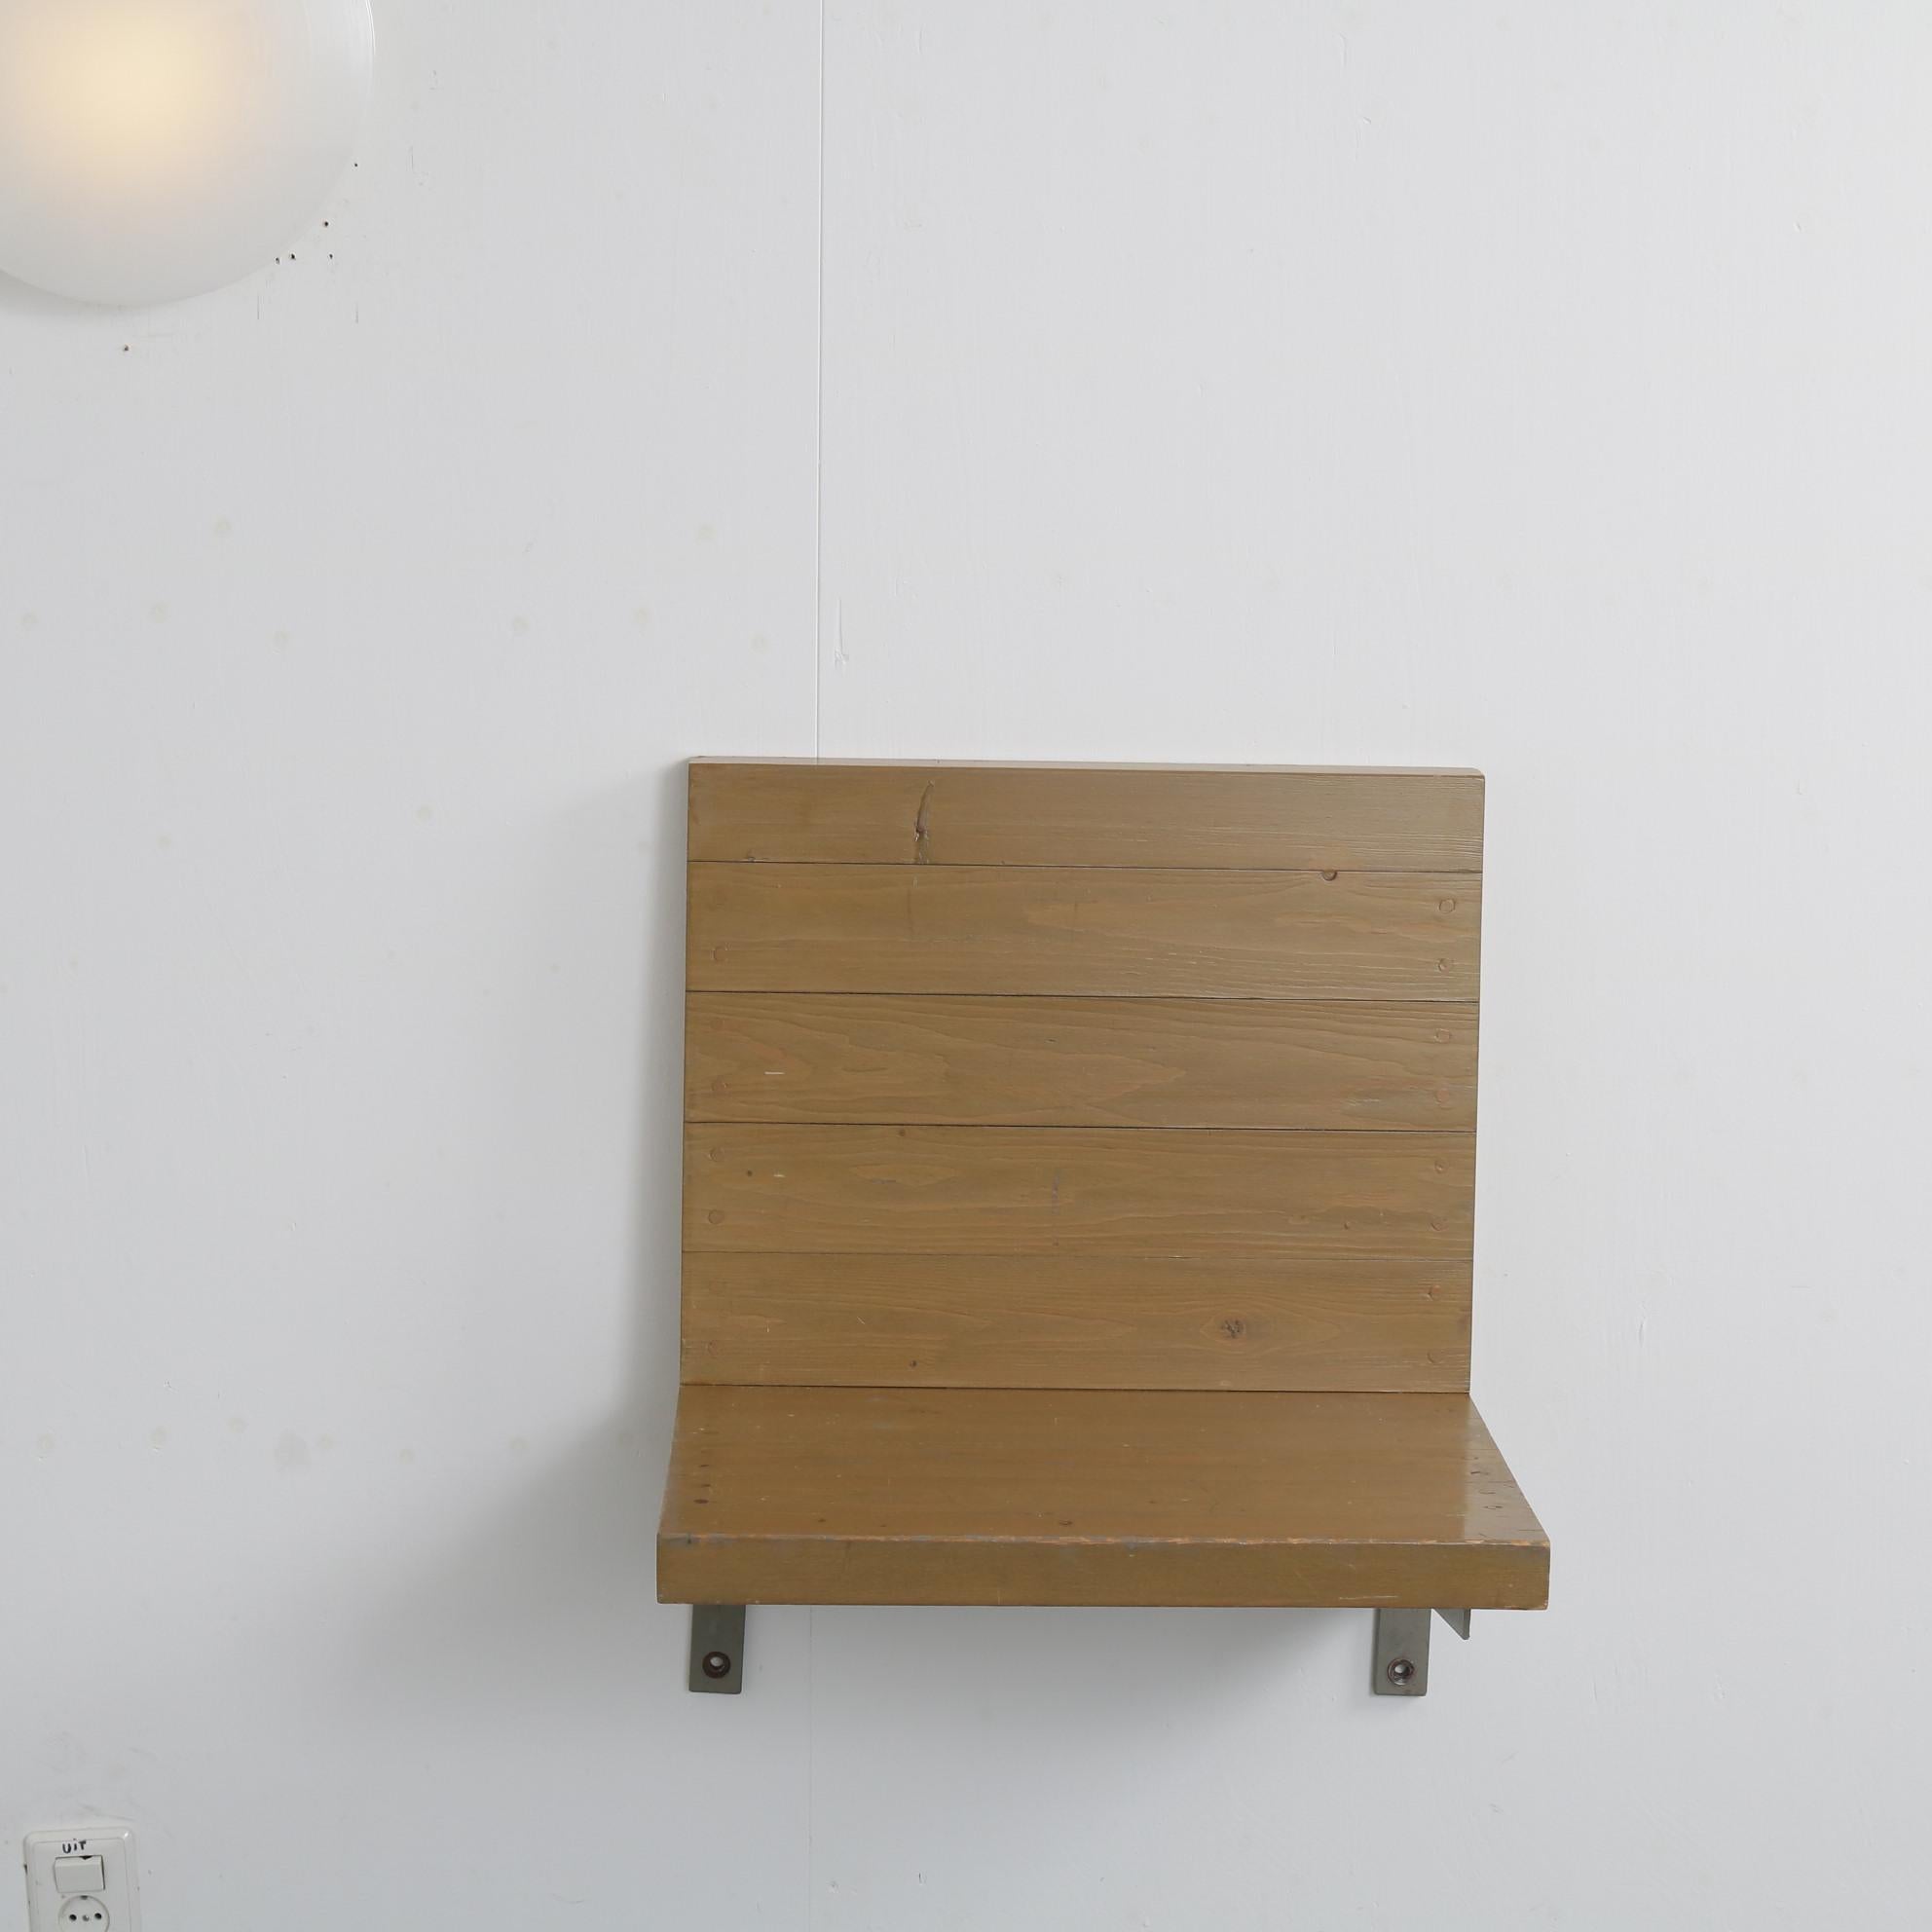 Rare Dom Hans van der Laan Wall Mounted Seat, Netherlands, 1970 In Good Condition For Sale In Amsterdam, NL